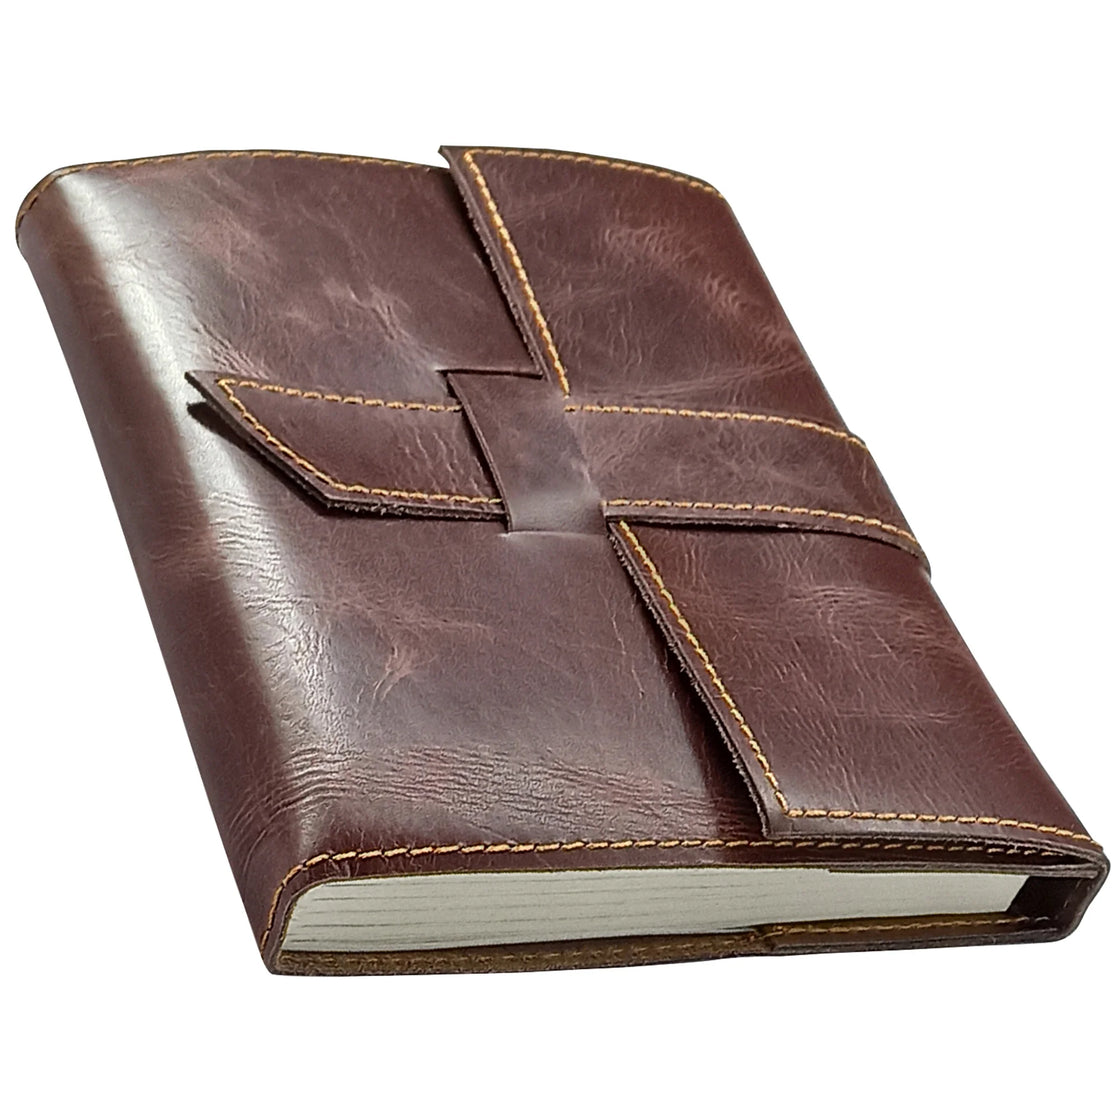 Leather Refillable Journal Notebook